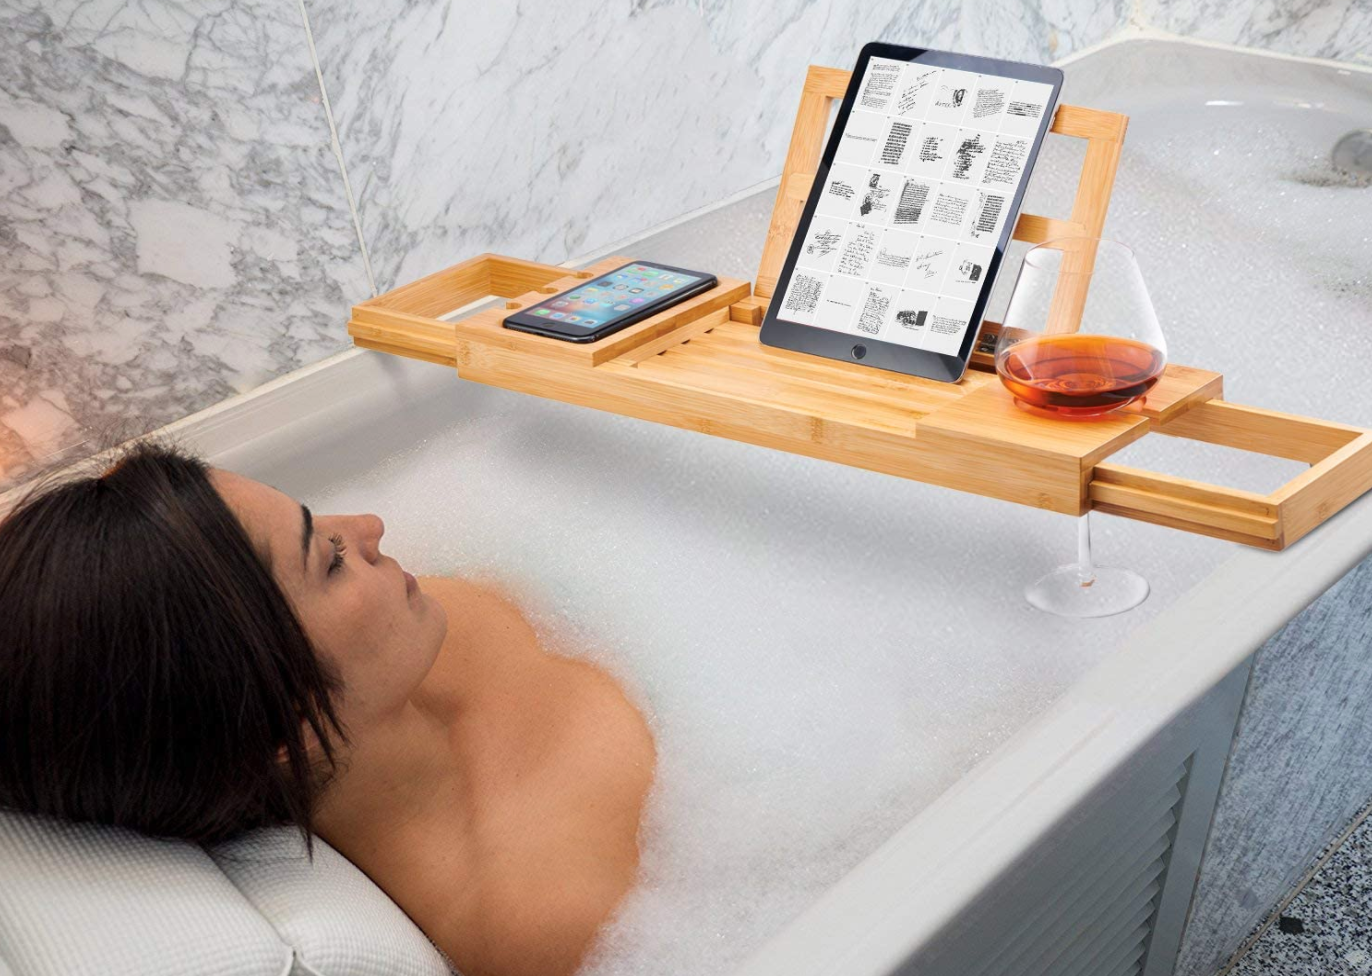 And a bath bubble massage mat to easily turn your tiny, boring tub into the  Jacuzzi of your dreams.